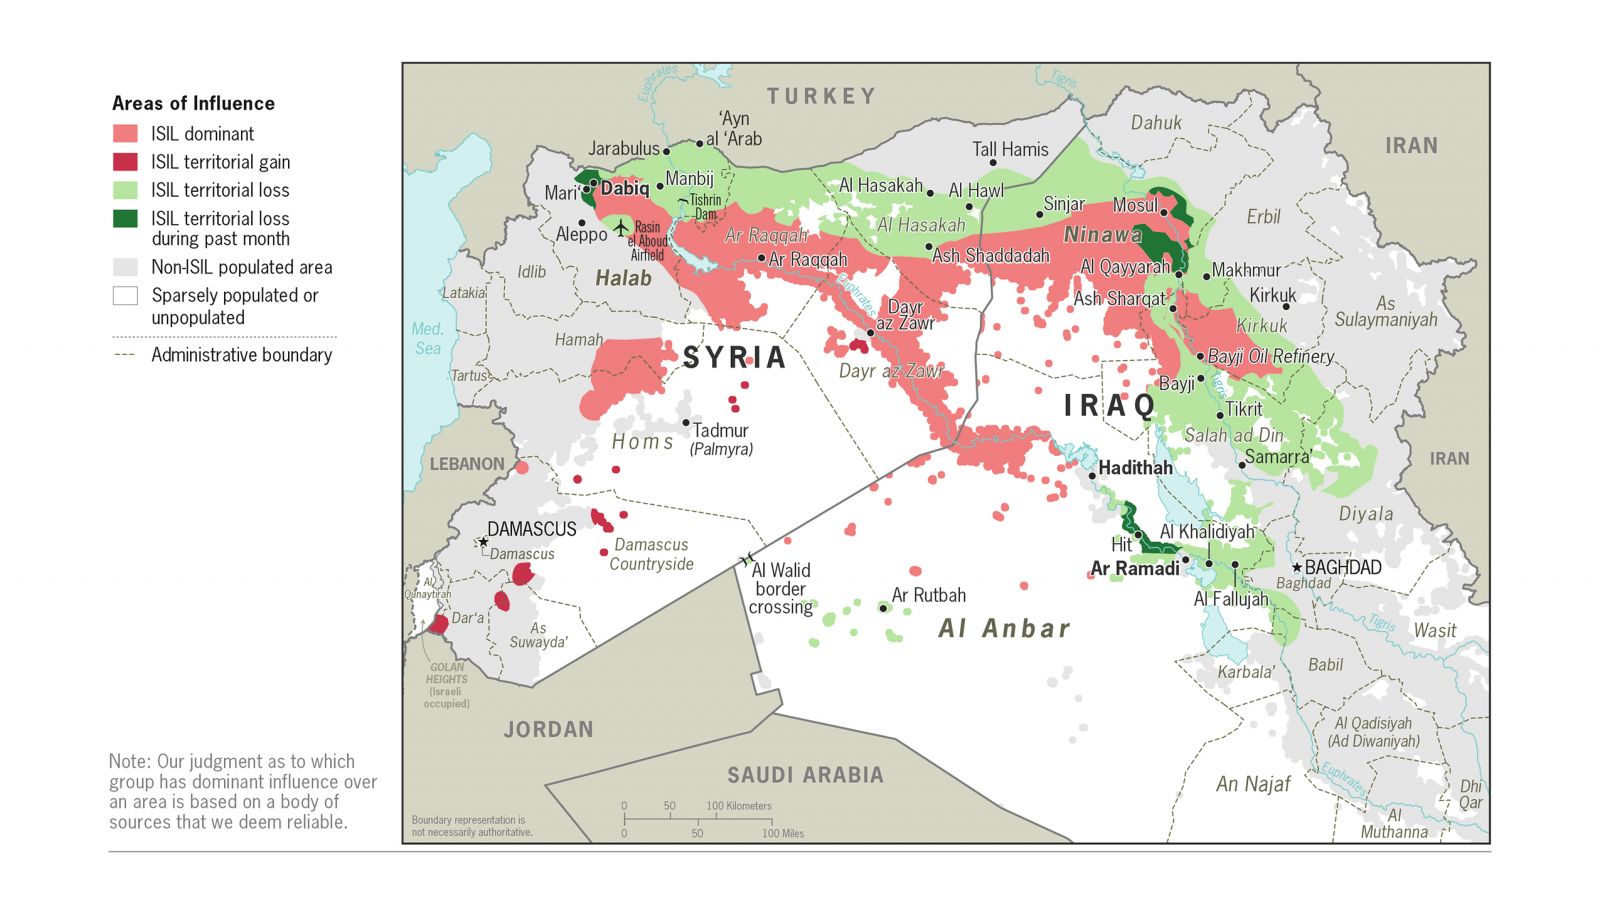 Islamic State Areas of Influence, August 2014 through October 2016